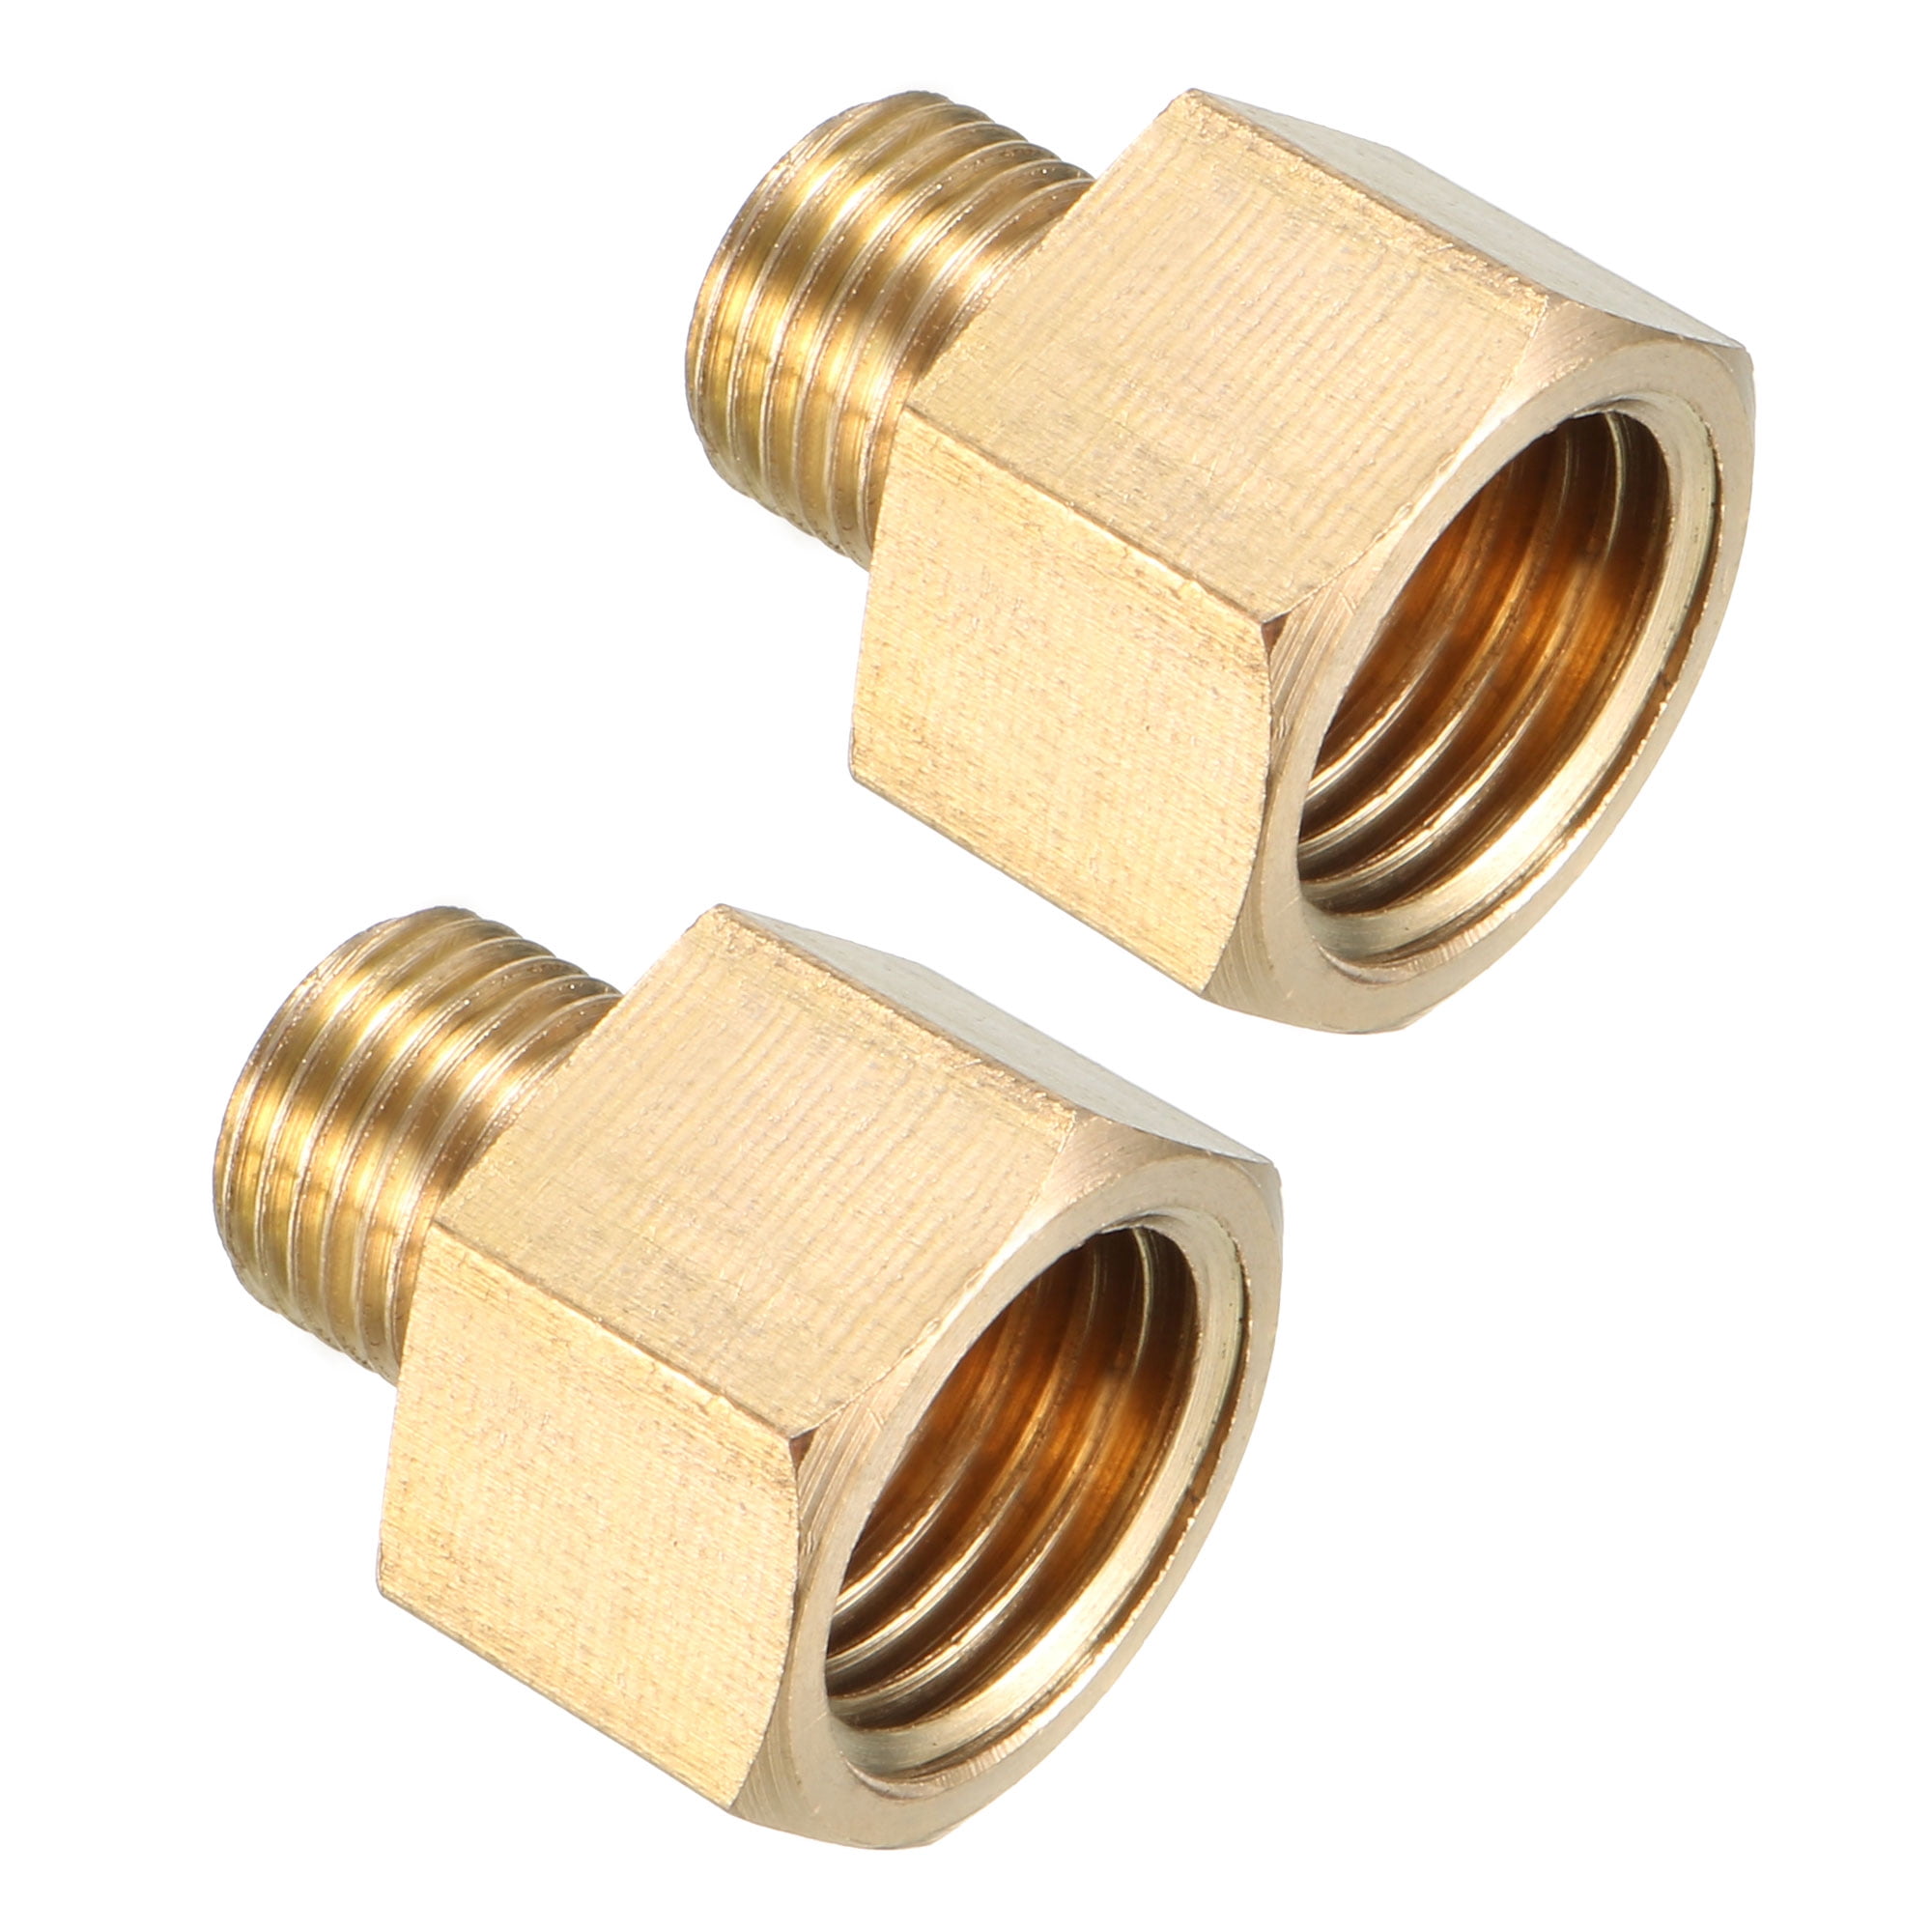 Brass adaptor any male and/or female combinations 